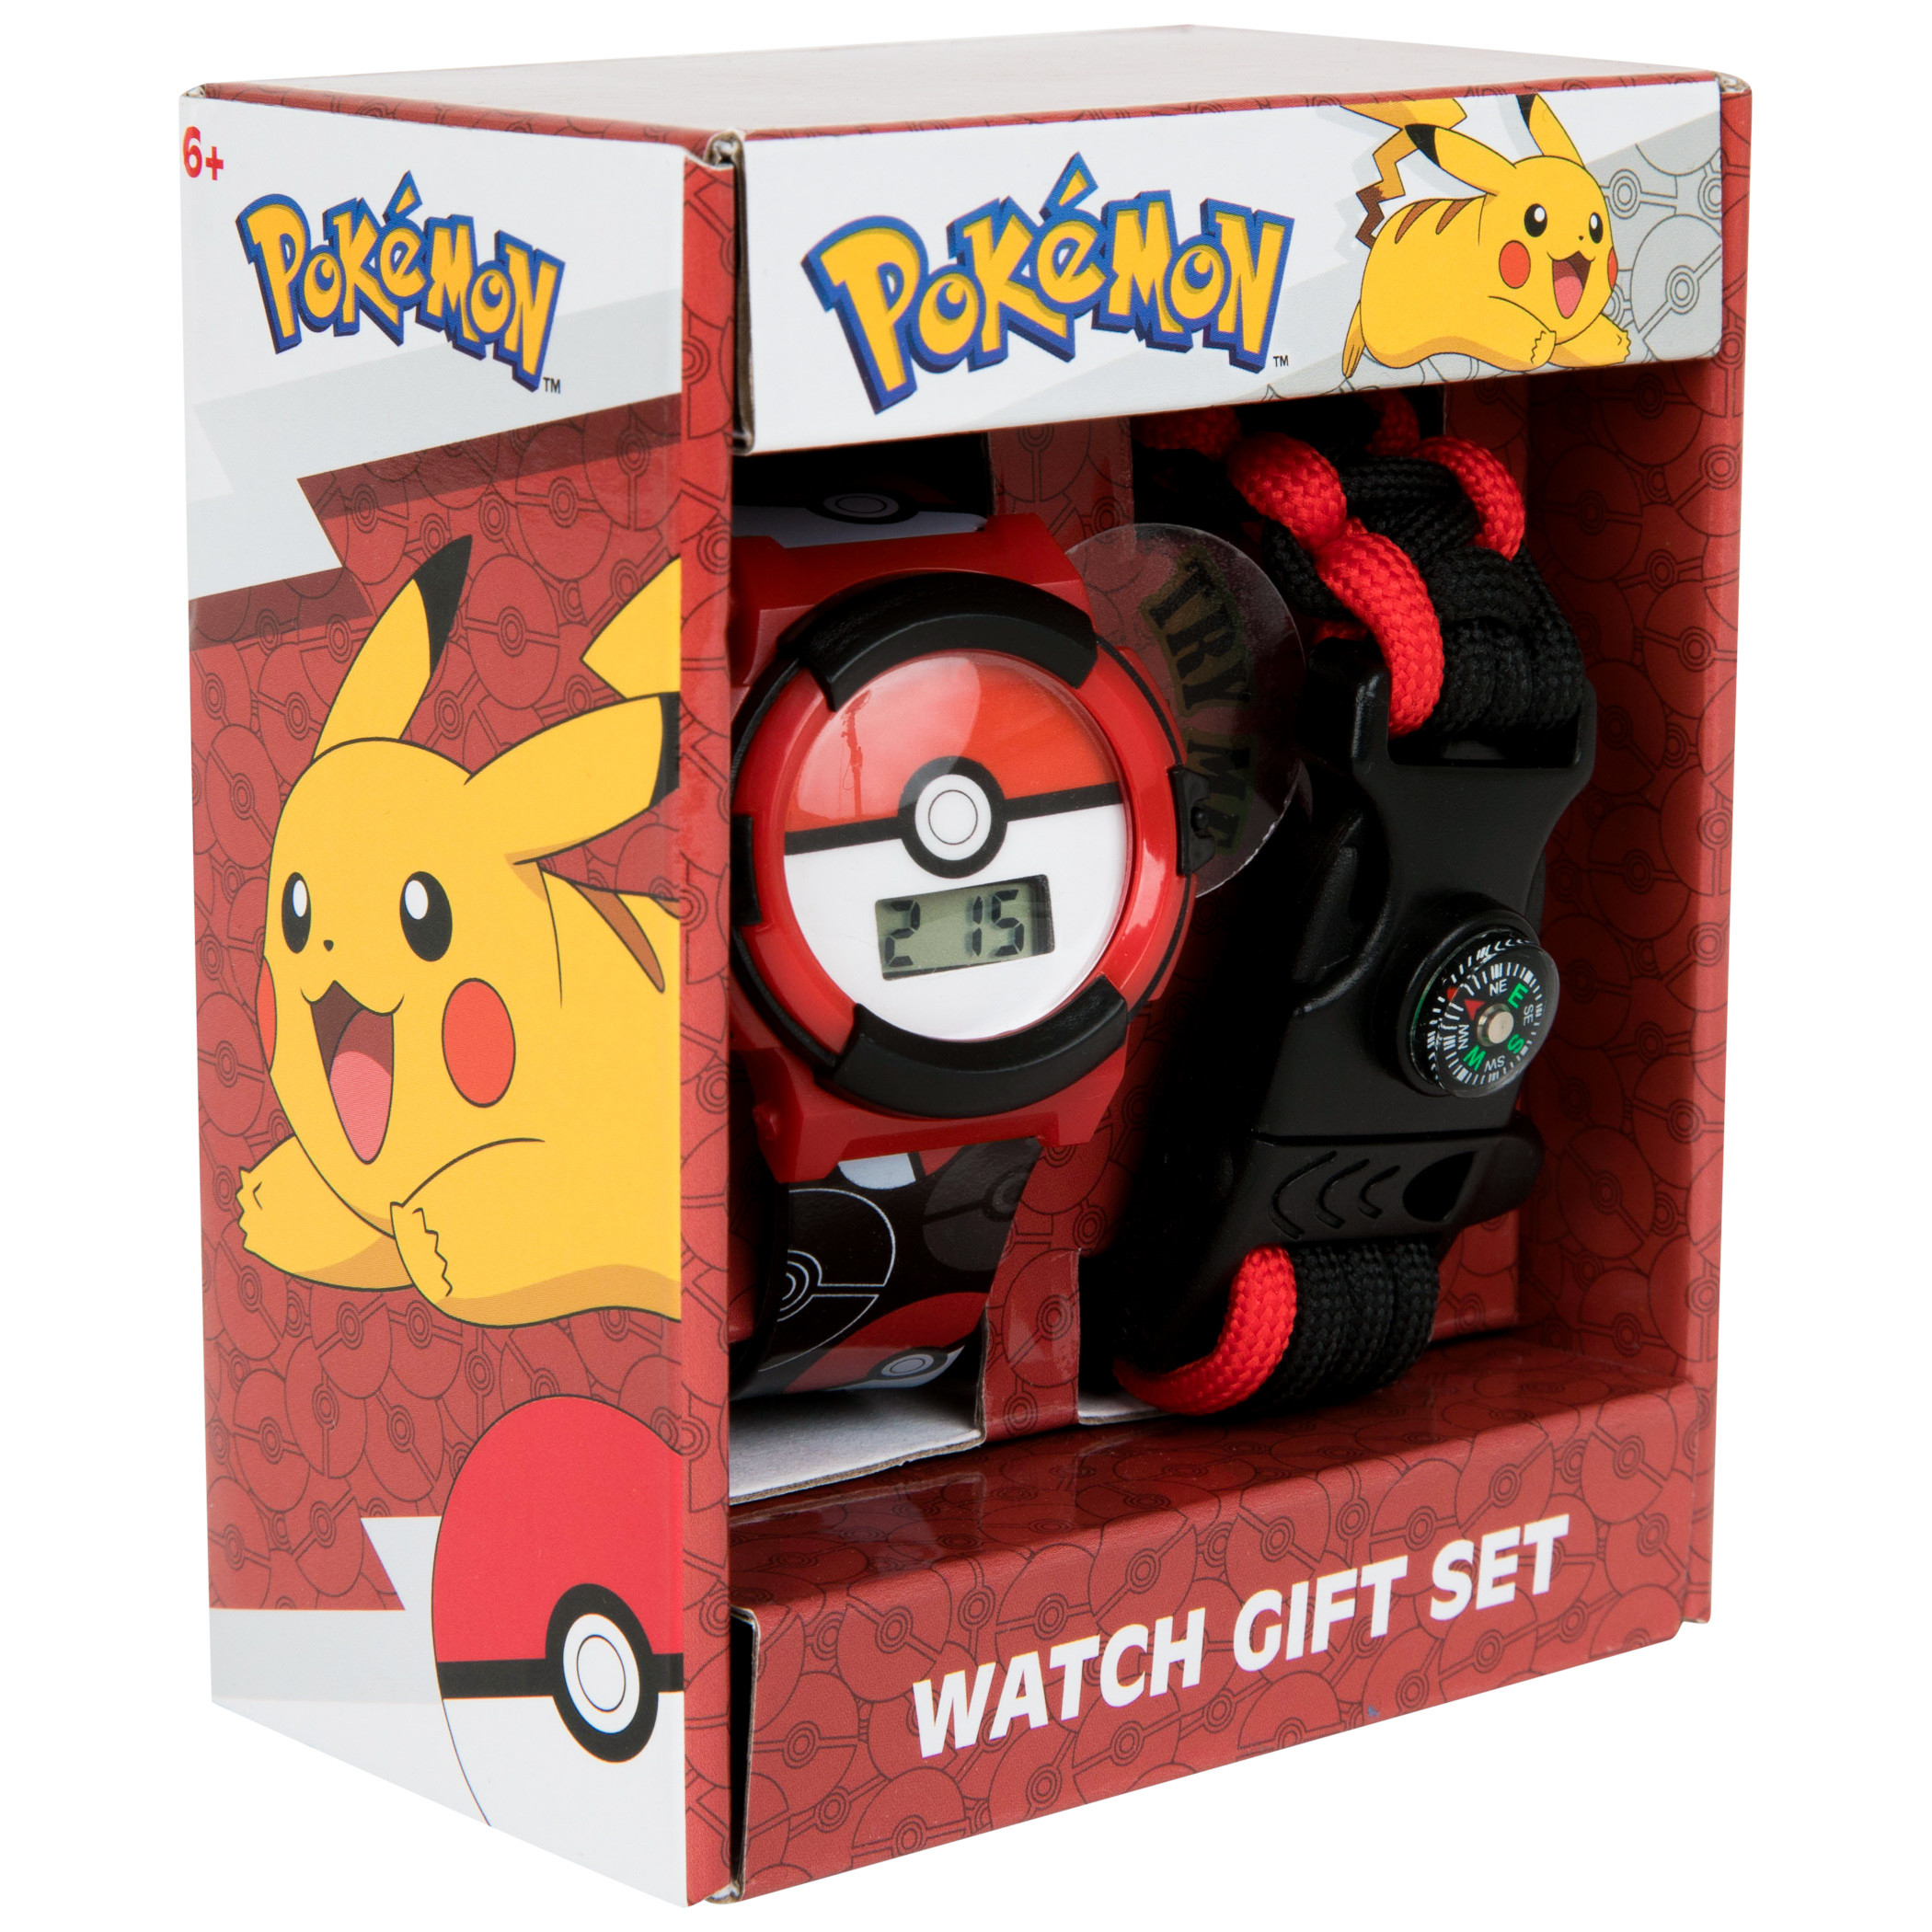 Pokemon Pokeball LCD Watch with Corded Survival Band